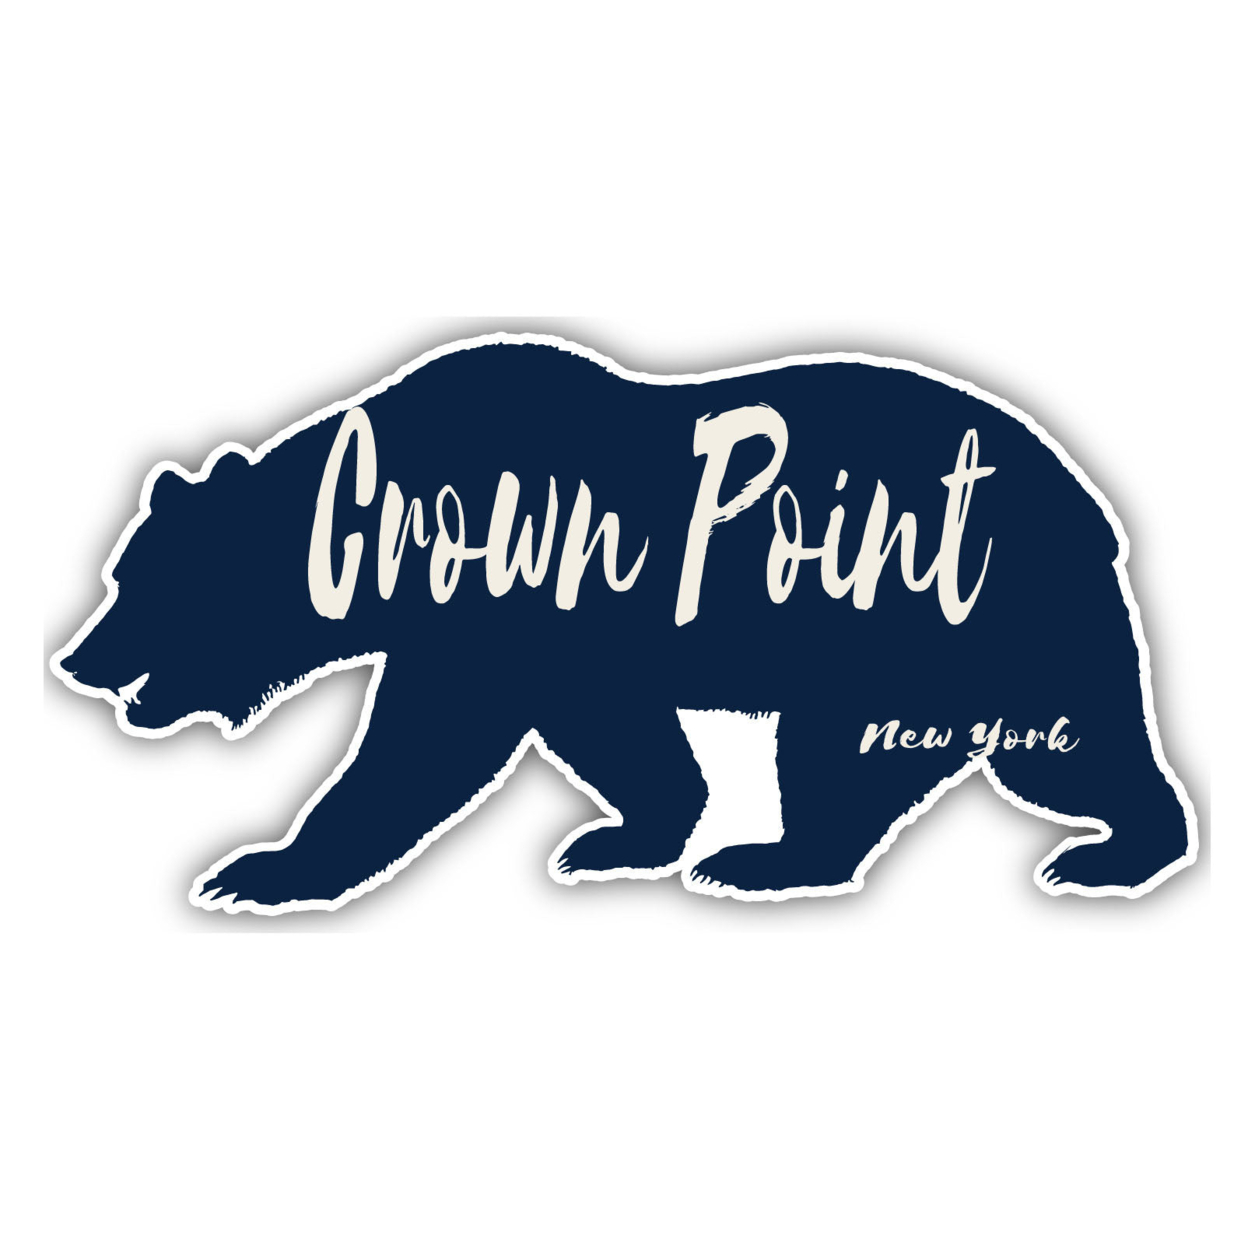 Crown Point New York Souvenir Decorative Stickers (Choose Theme And Size) - 4-Pack, 4-Inch, Bear